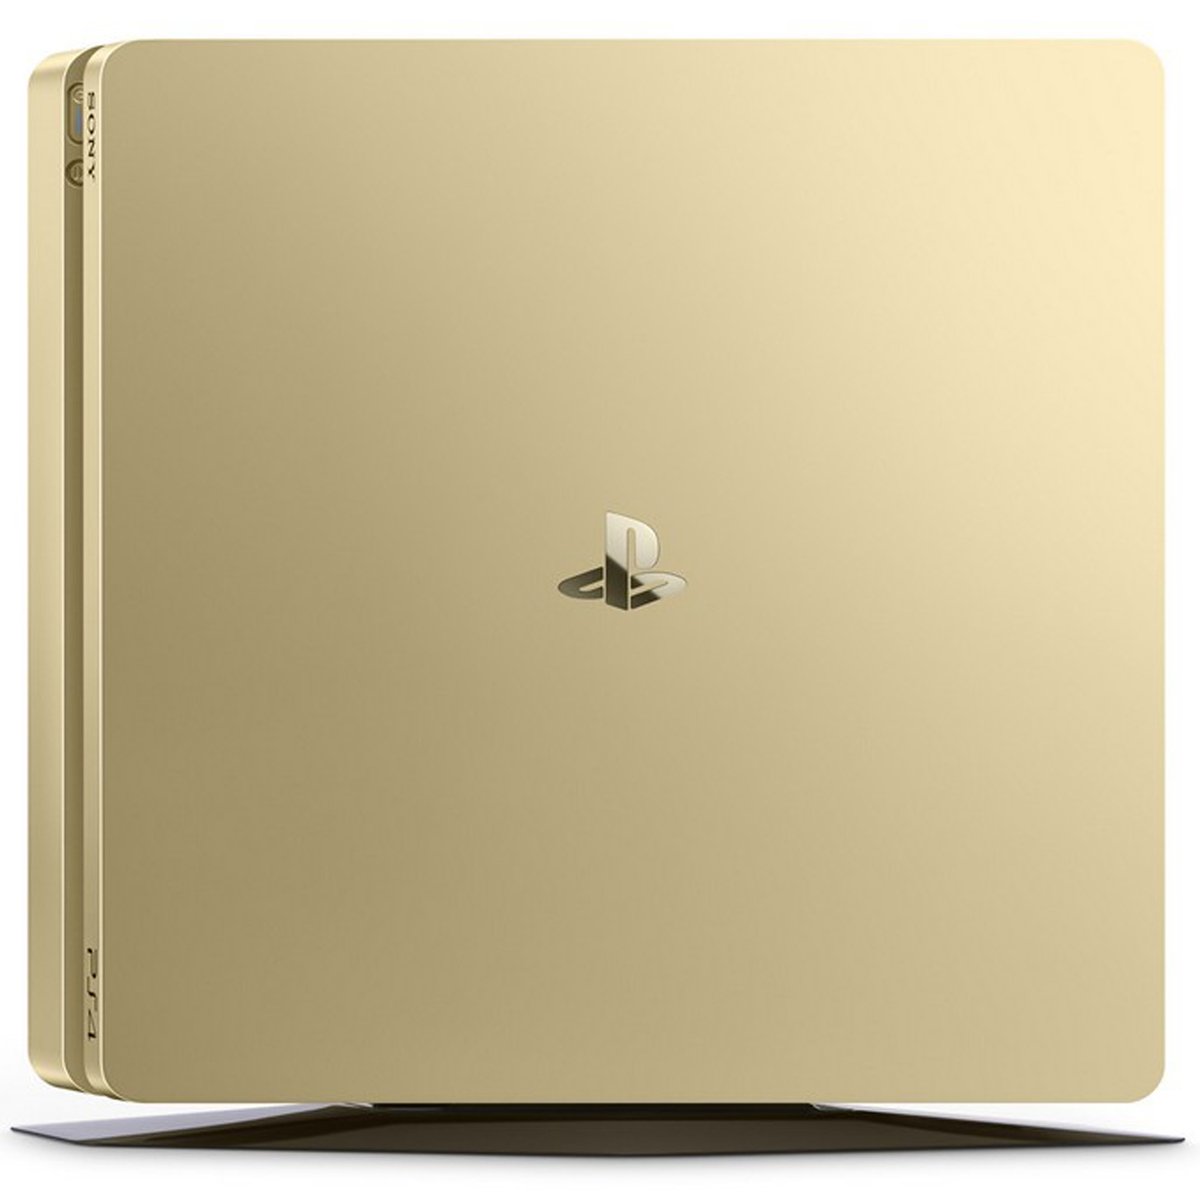 Sony PS4 Console 500GB Limited Edition Gold+2Controller